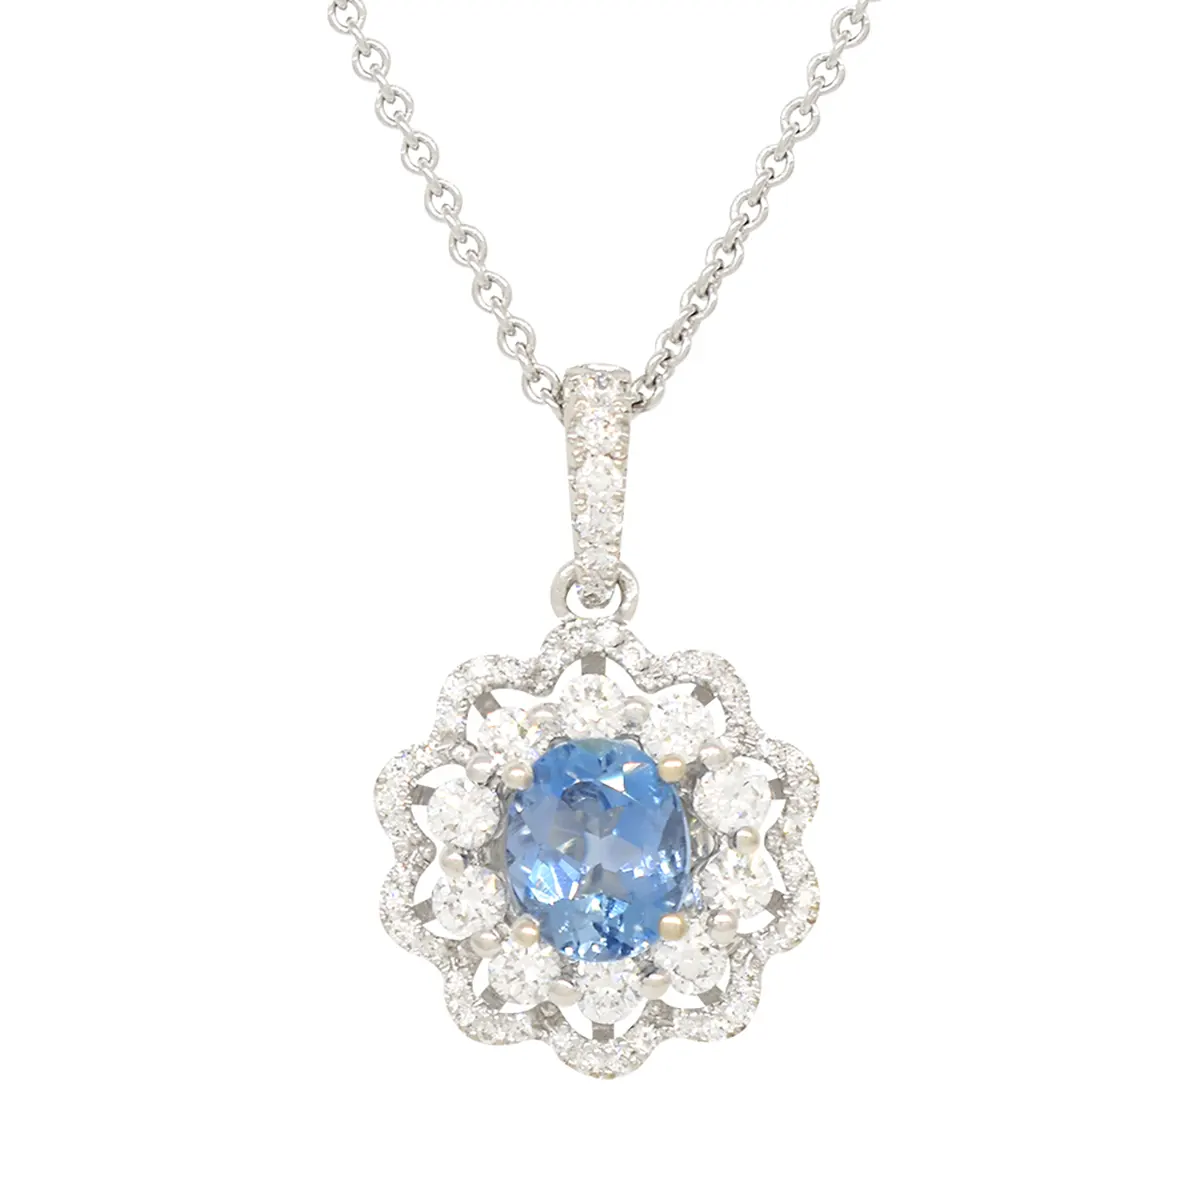 18K White Gold Aquamarine and Diamond Pendant Necklace with Stunning Blue Color